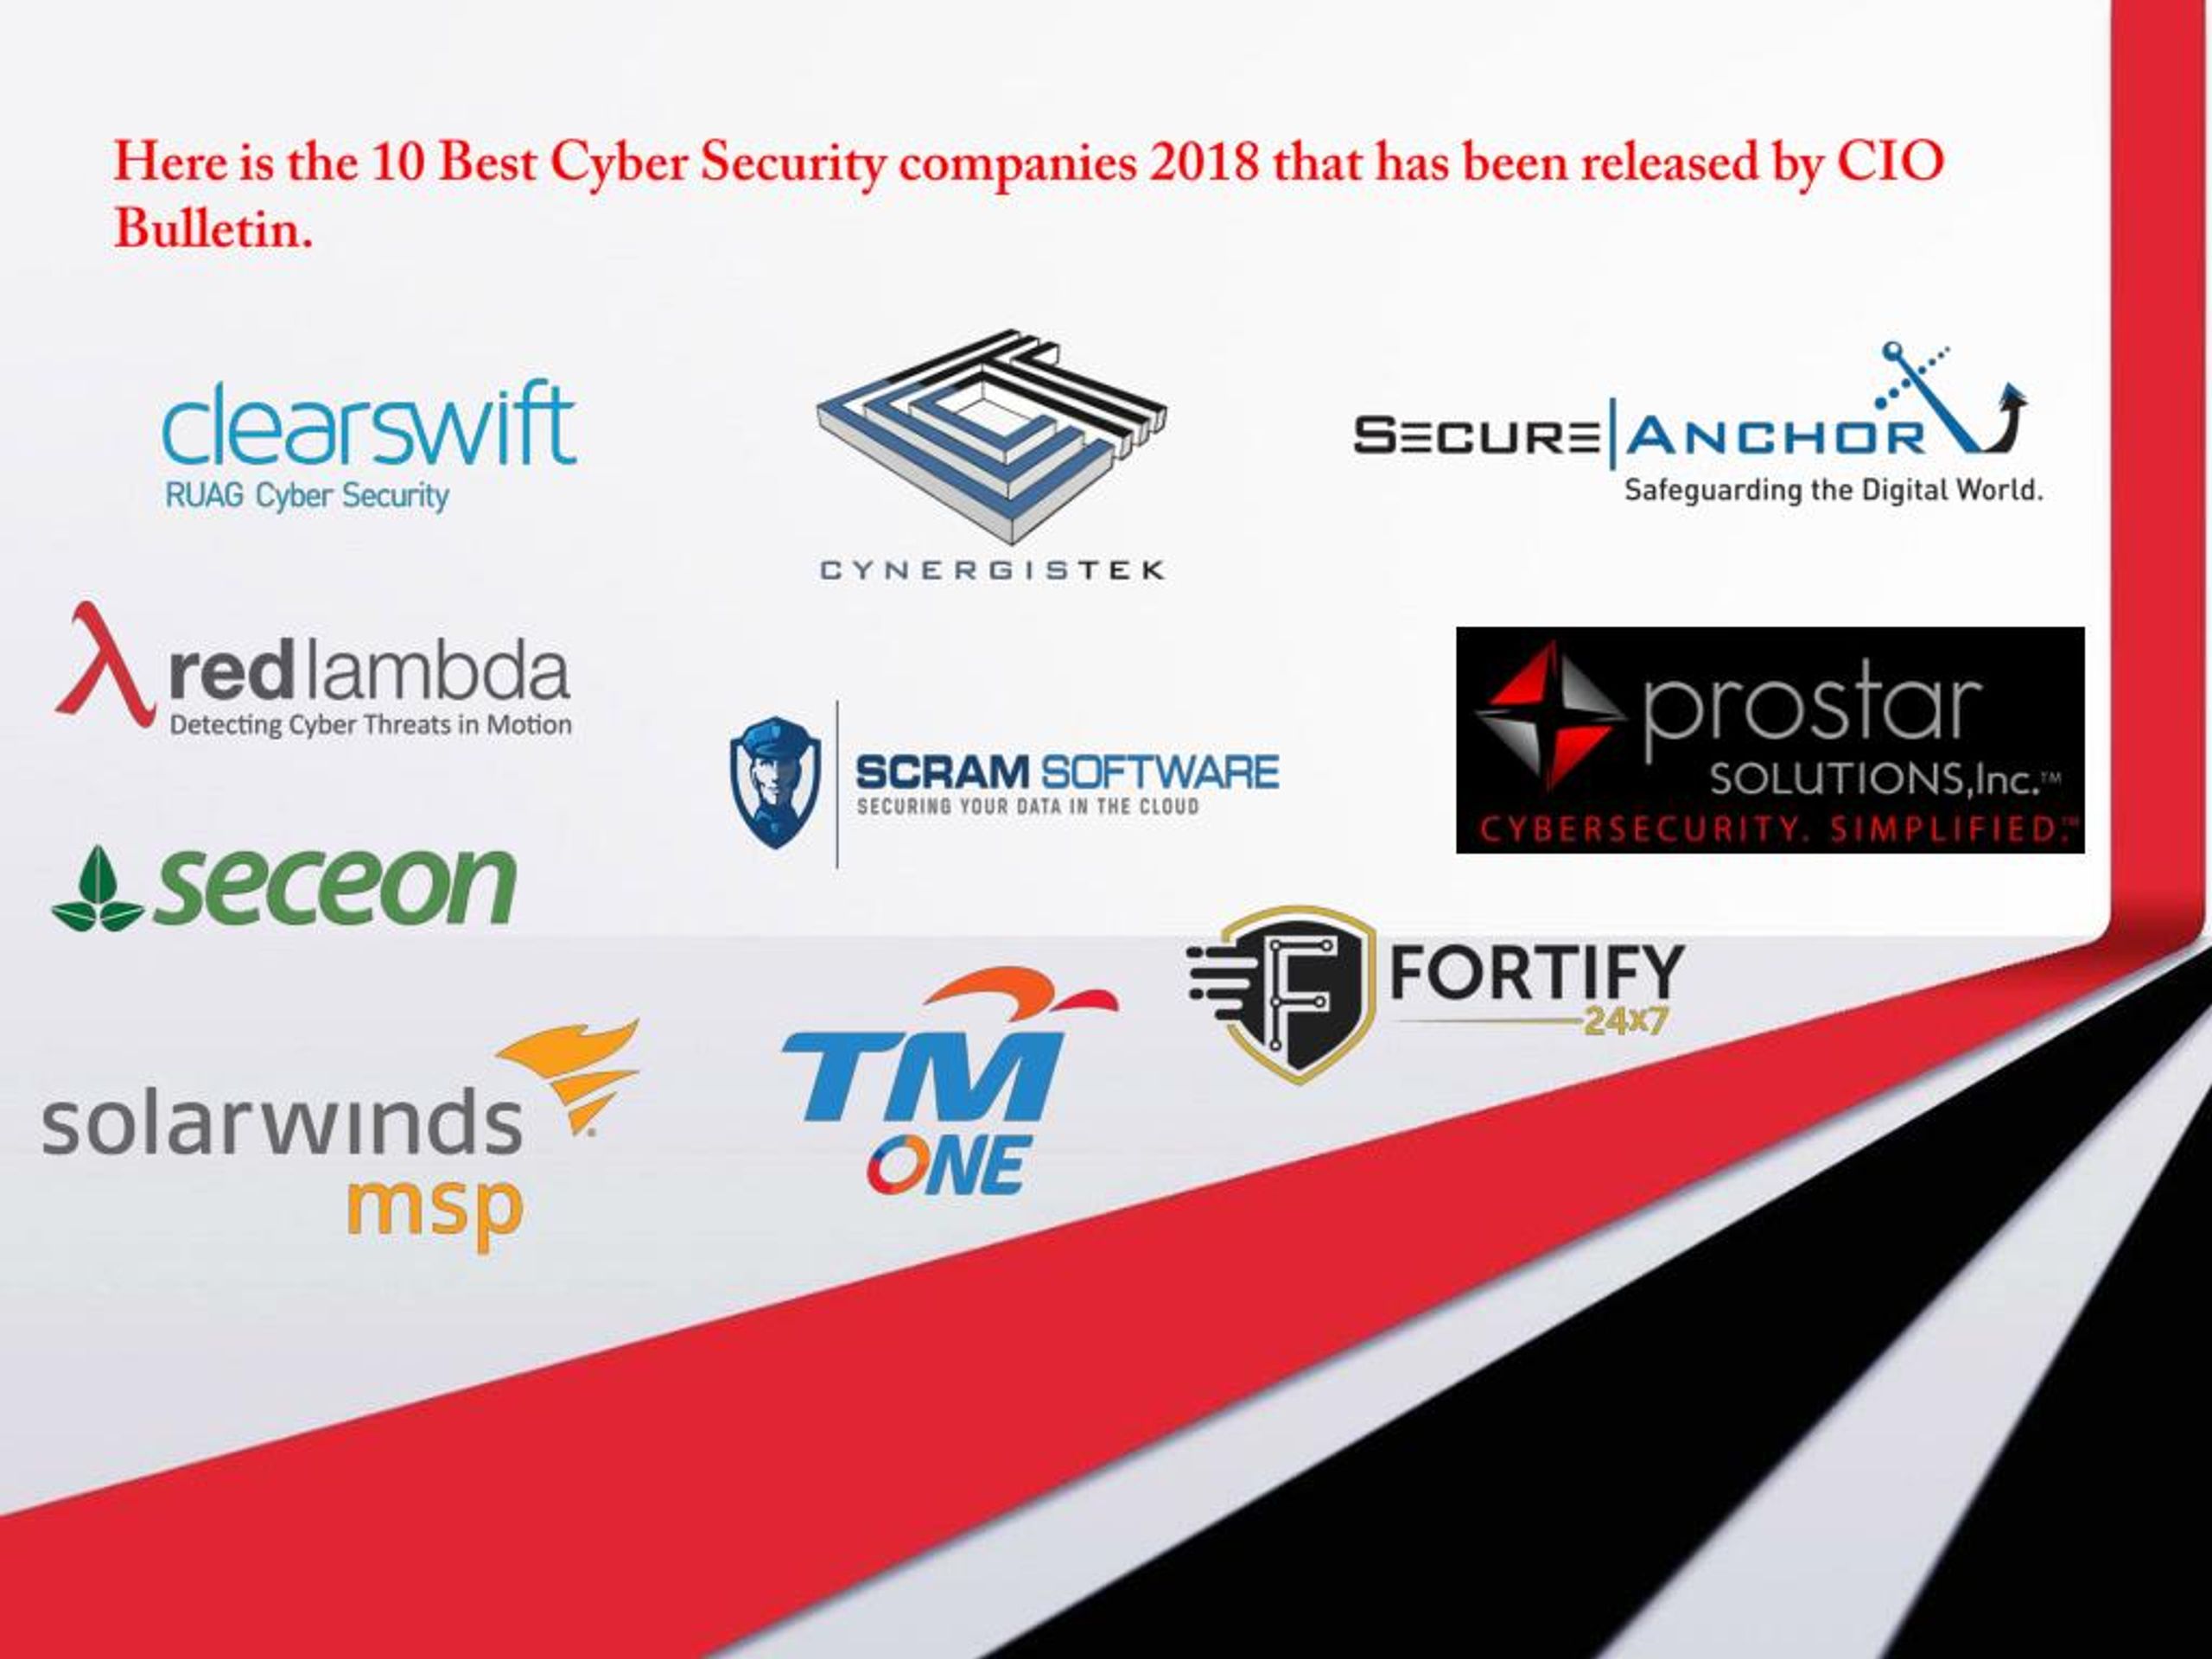 PPT 10 Best Cyber Security Companies 2018 by CIO Bulletin PowerPoint